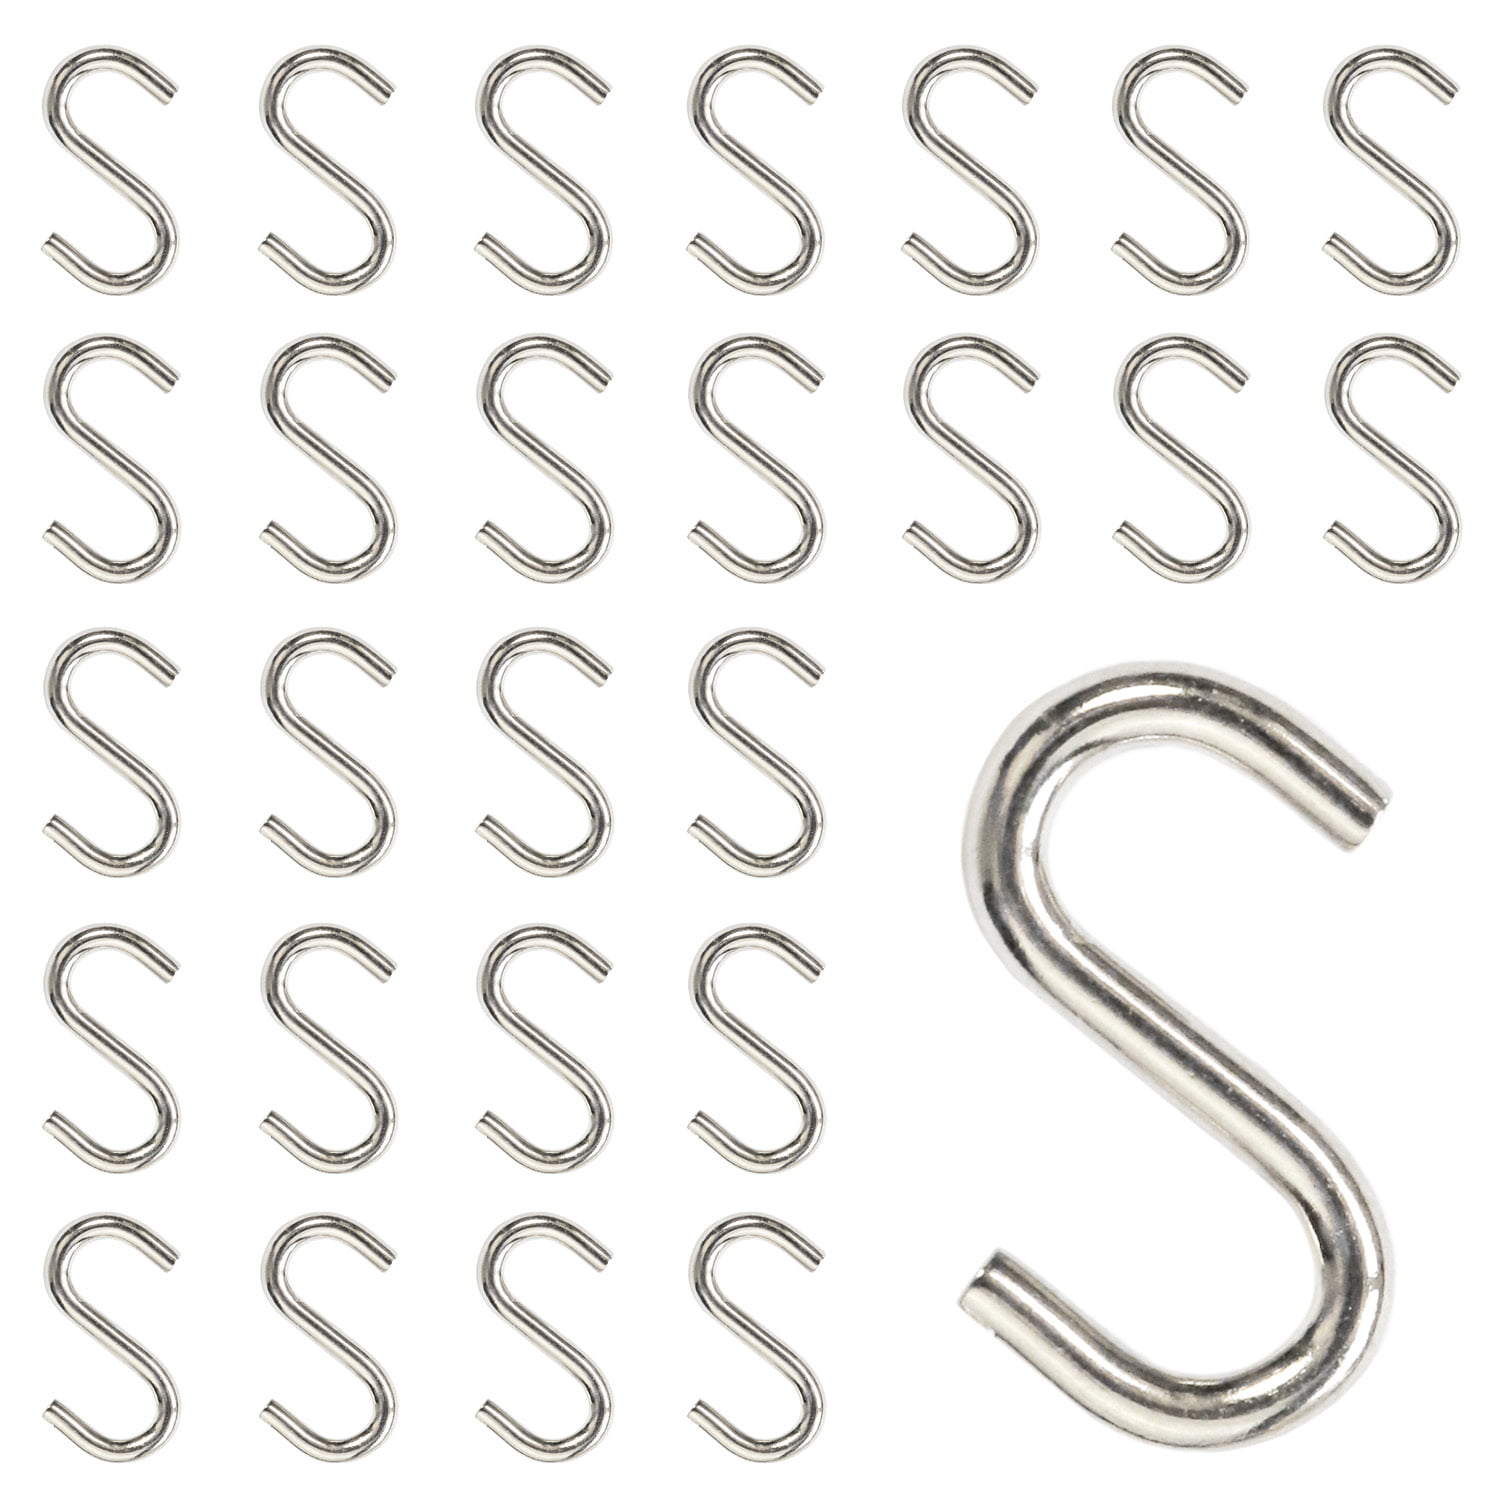 25 Pack S-Shaped Wire Hooks Heavy Duty Strong White for Shower Curtain Hanging 